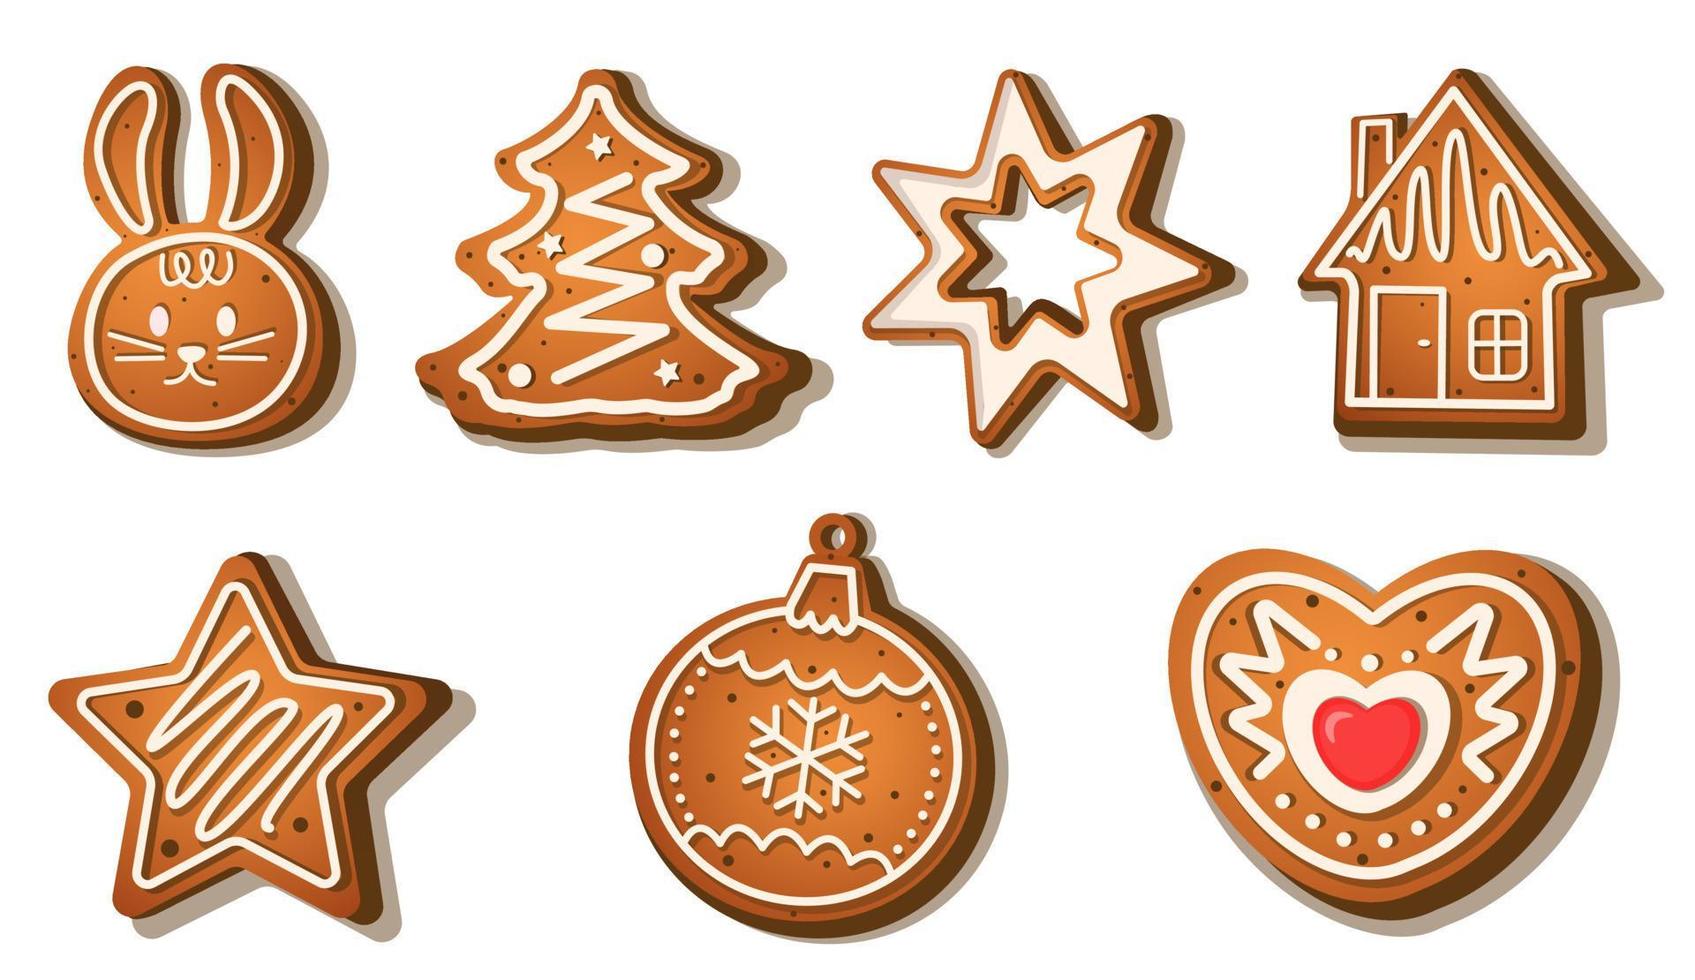 Numerals and New Year toys in the form of gingerbread a Christmas tree, a gingerbread house, stars, snowflakes and a rabbit as a symbol of the new year 2023. drawn in cartoon vector style